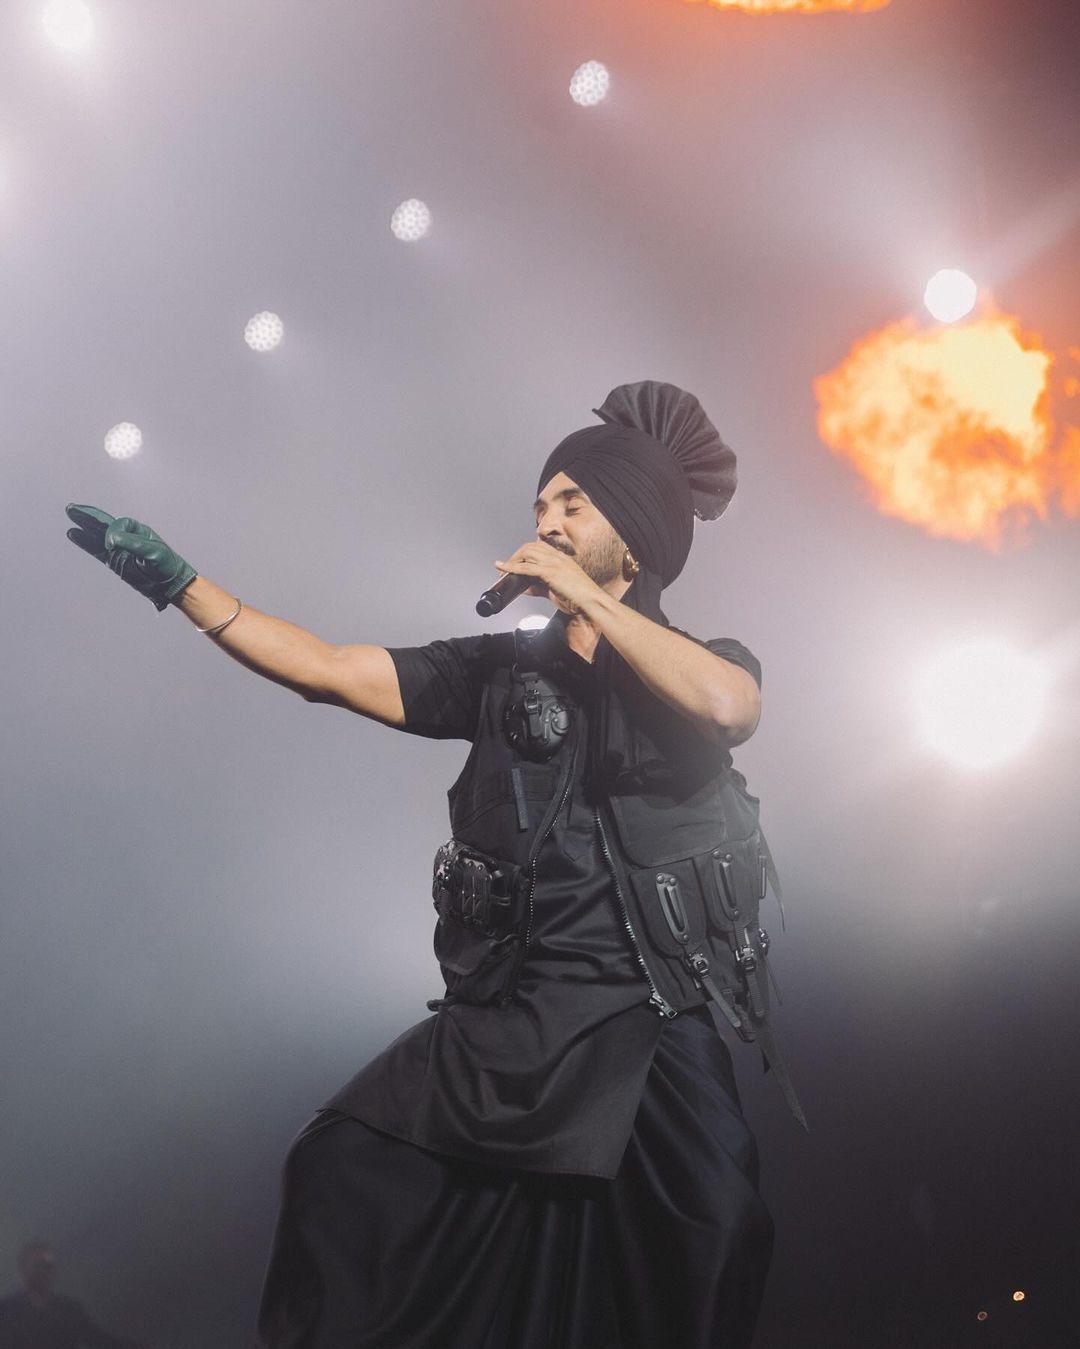 The singer always manages to catch our fancy by adding his unique twist to anything he wears. Even in this all black ensemble, Diljit Dosanjh manages to stand apart